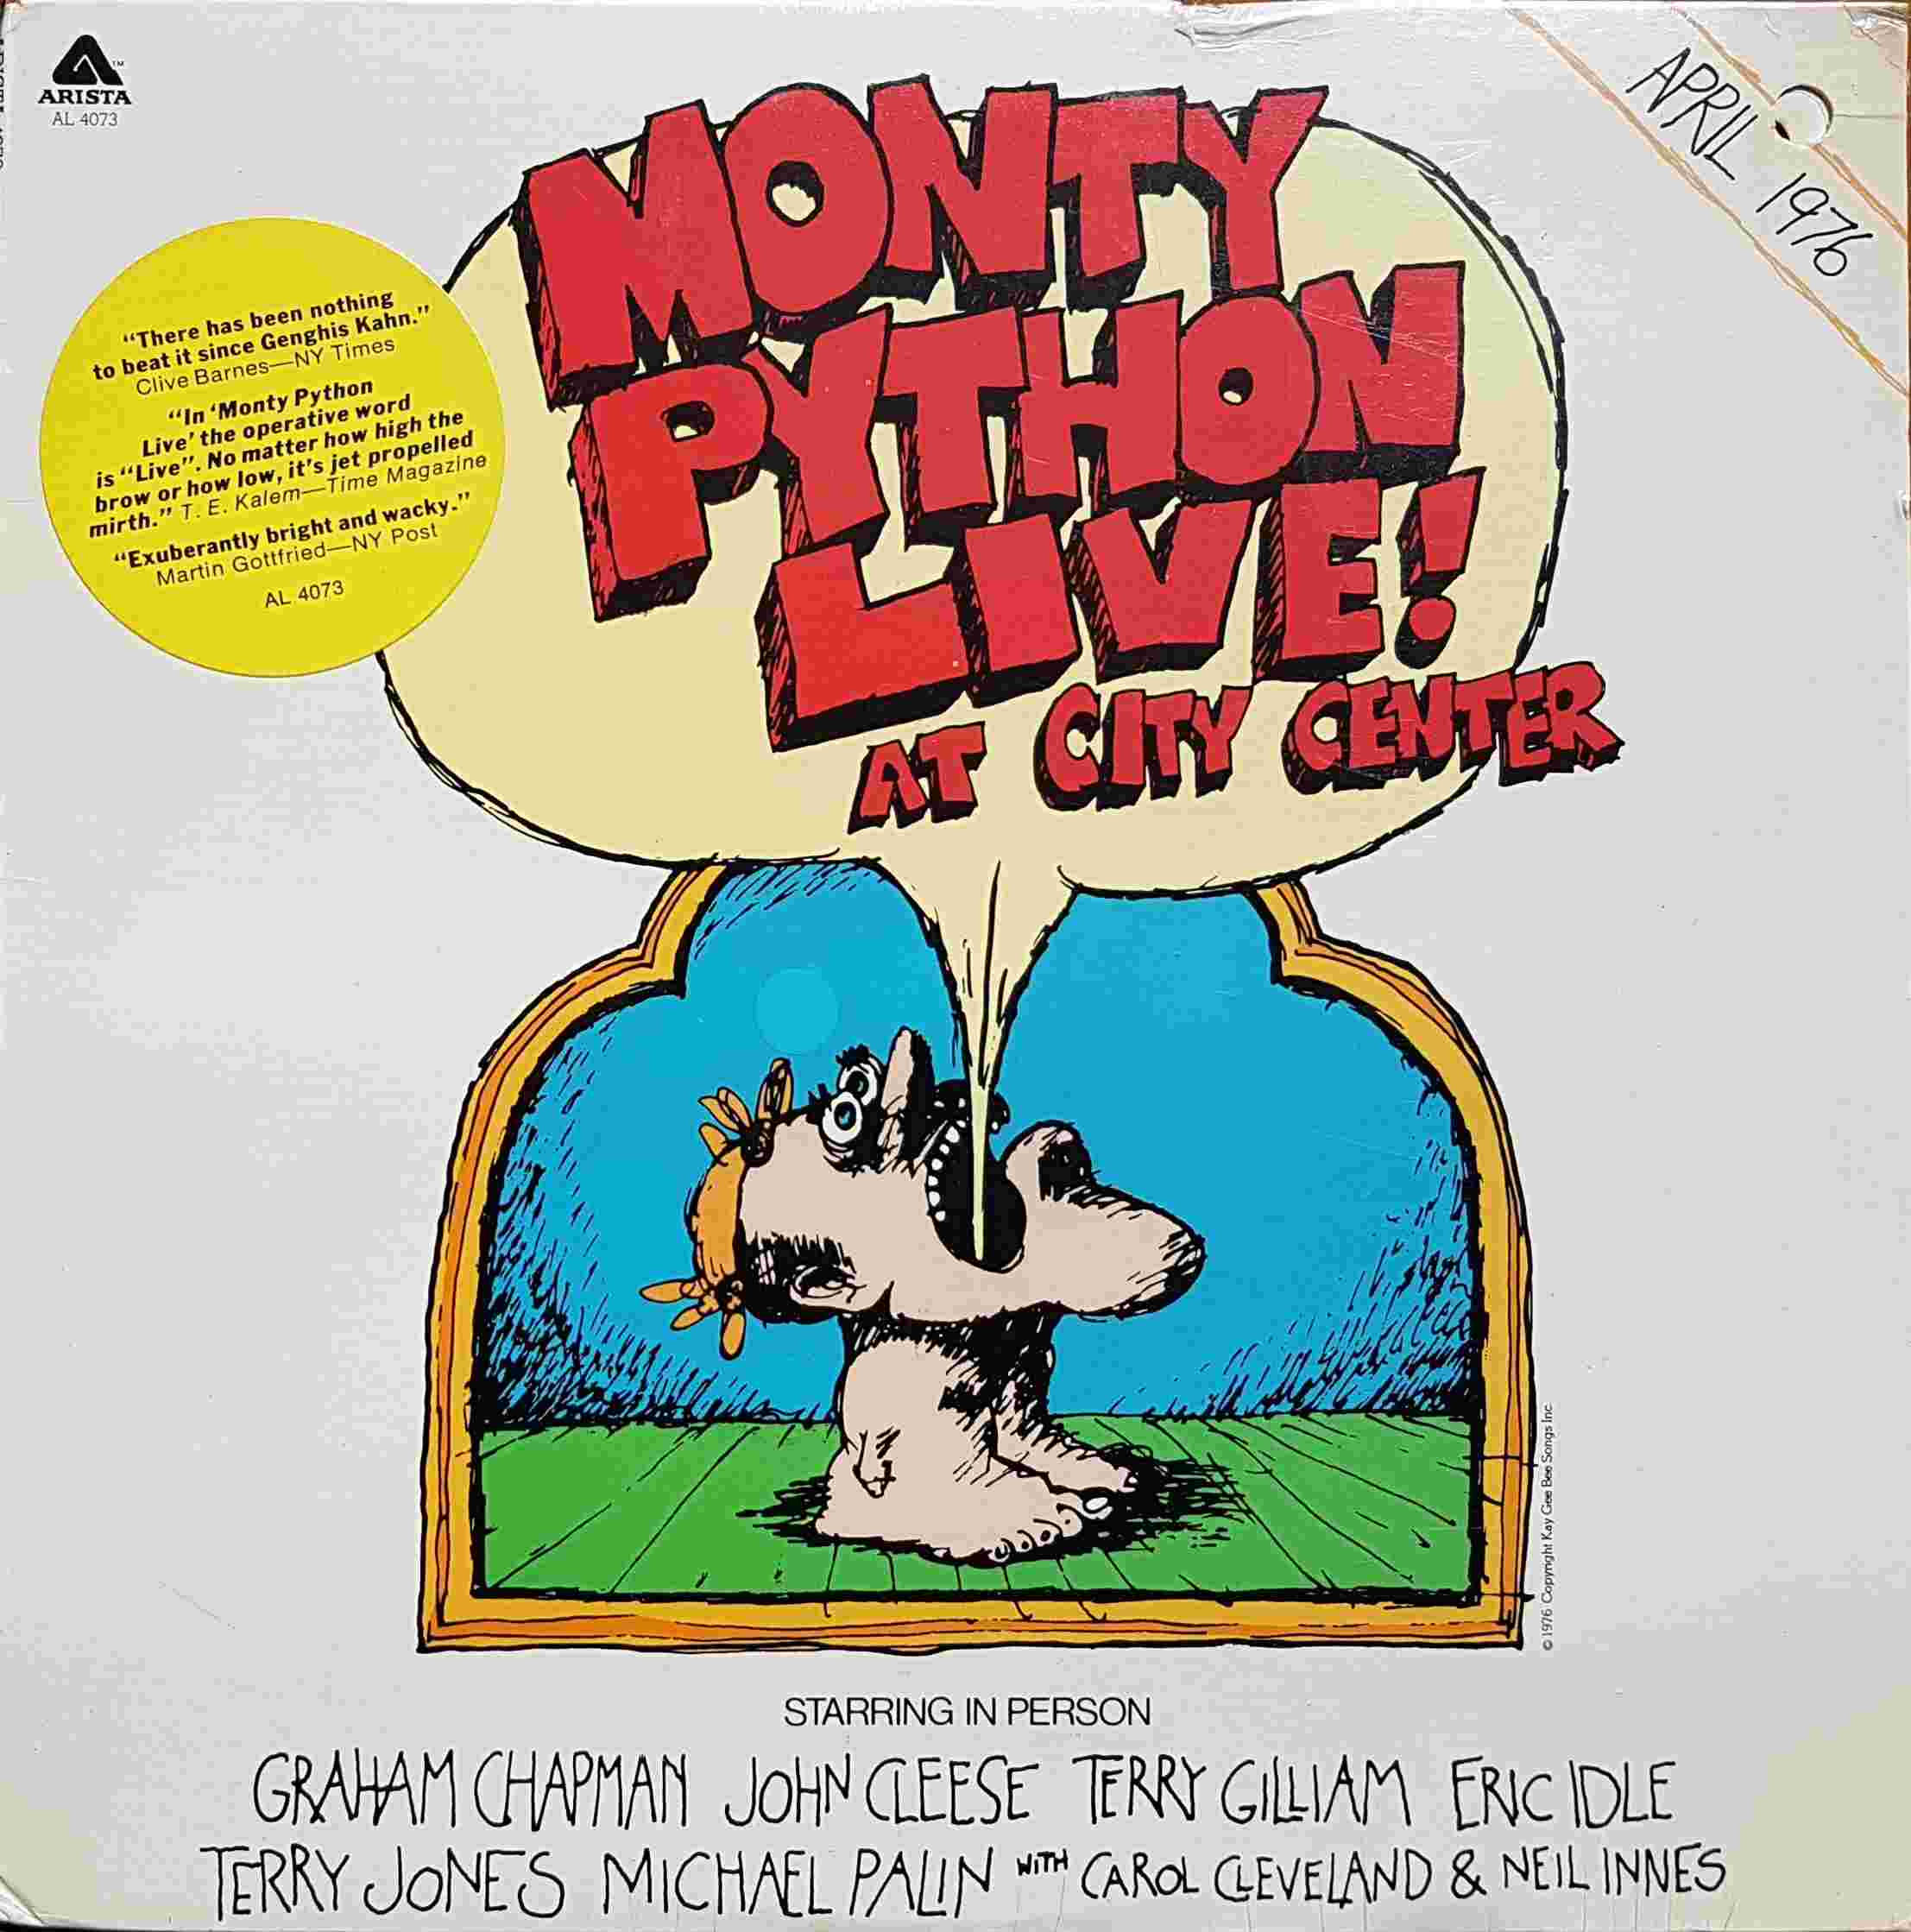 Picture of AL 4073 Monty Python live ! At the City Centre by artist Monty Python from the BBC albums - Records and Tapes library